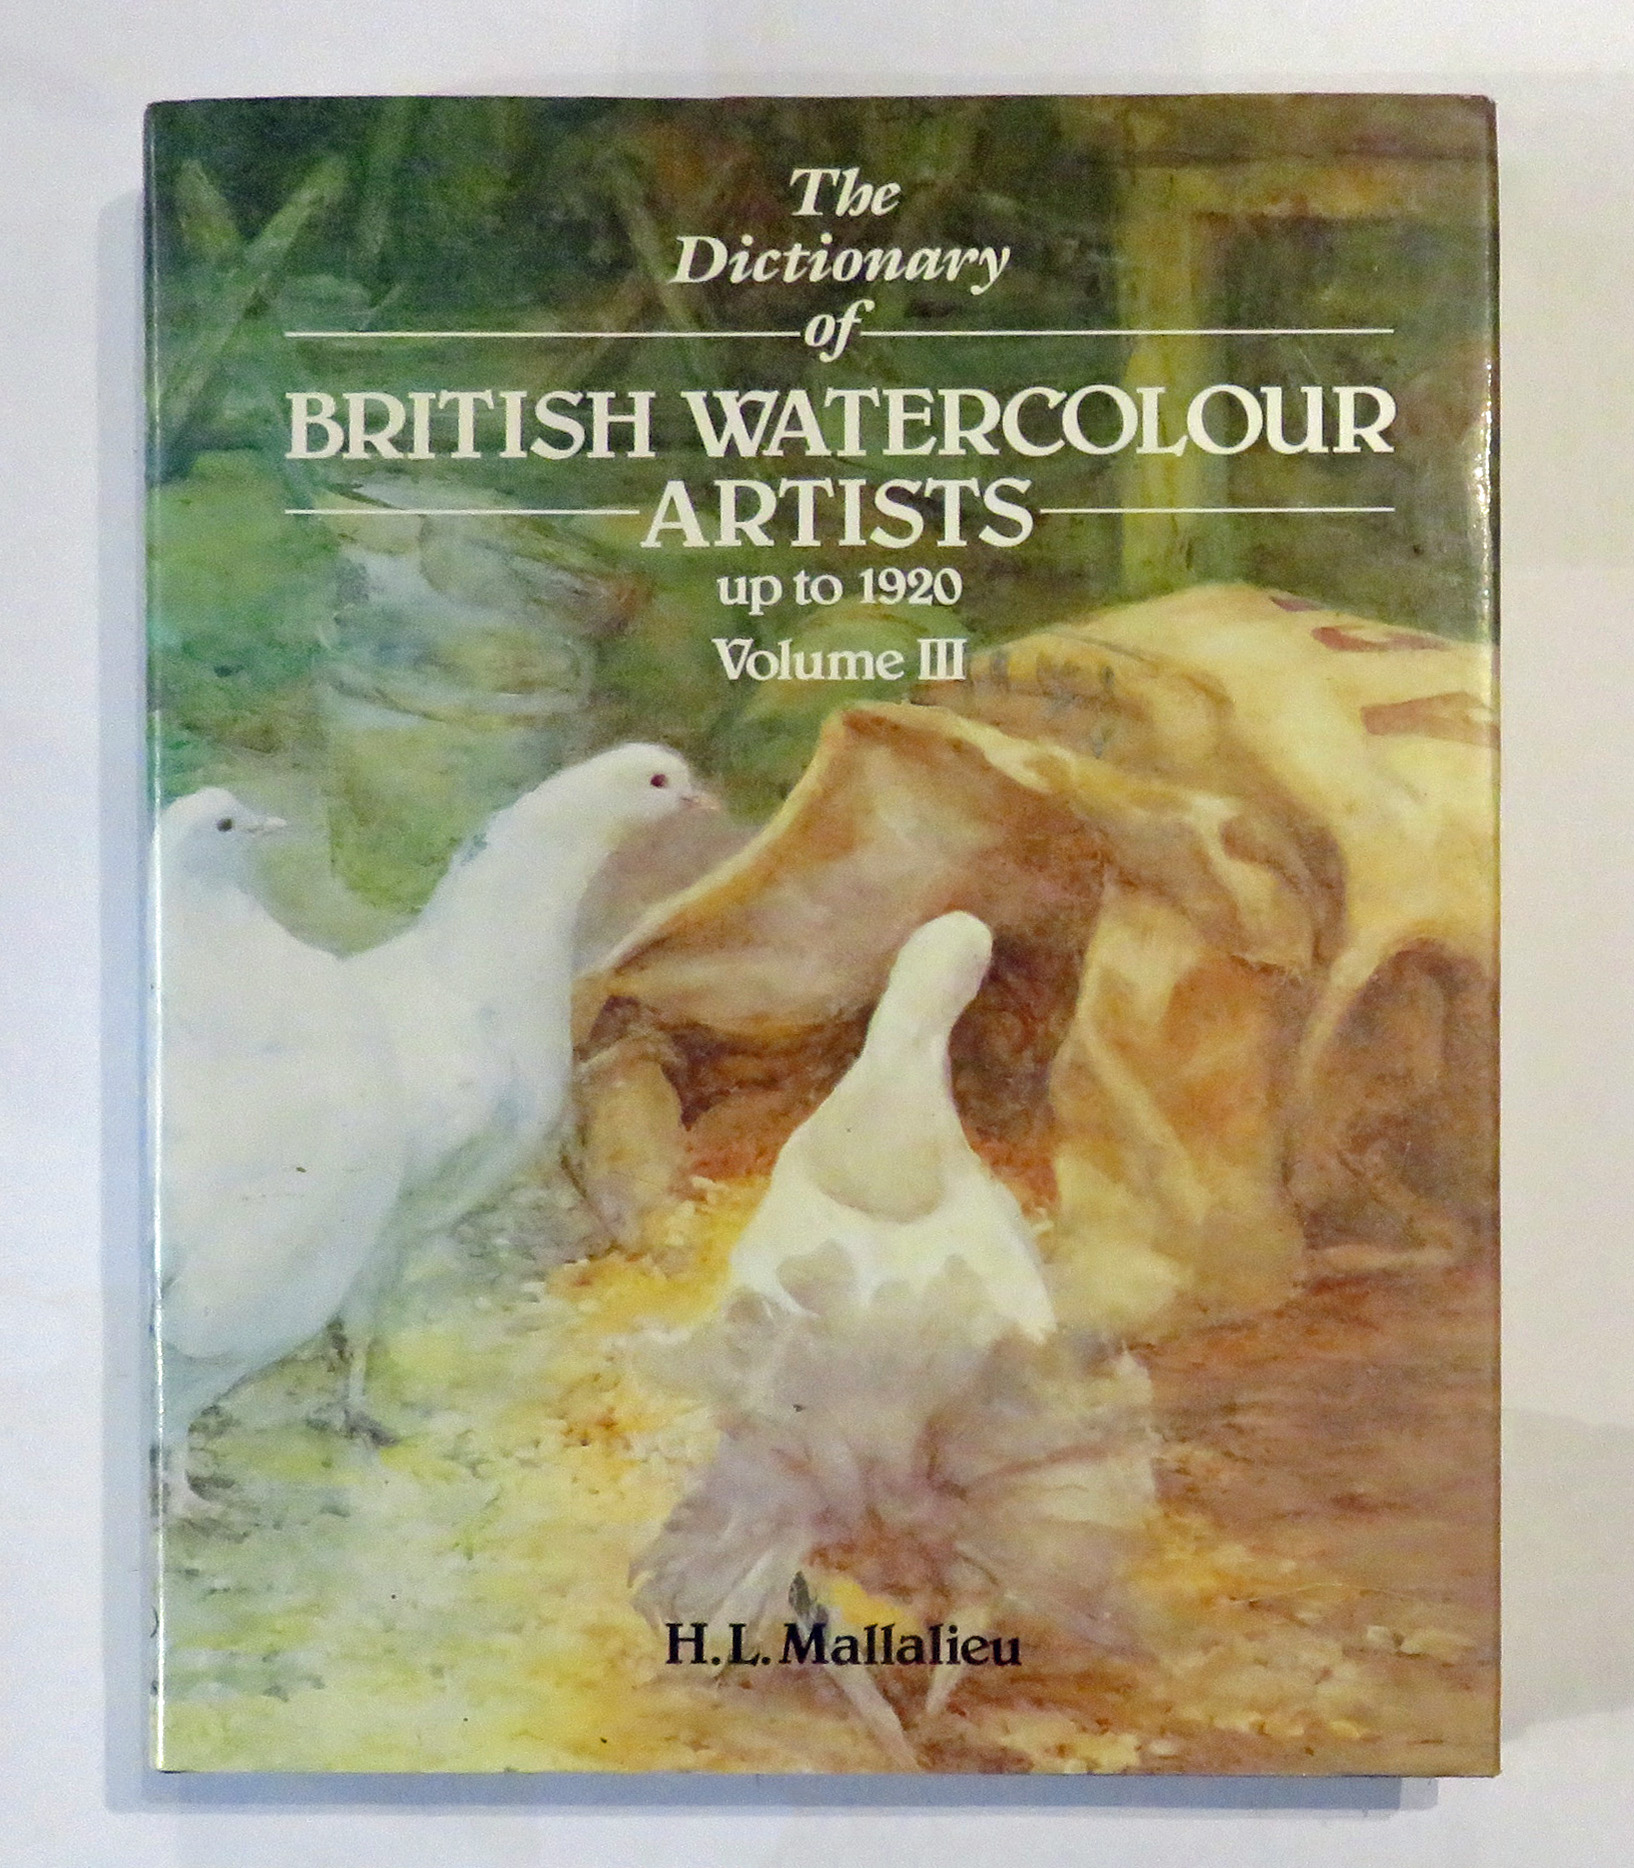 The Dictionary of British Watercolour Artists up to 1920 Volume III